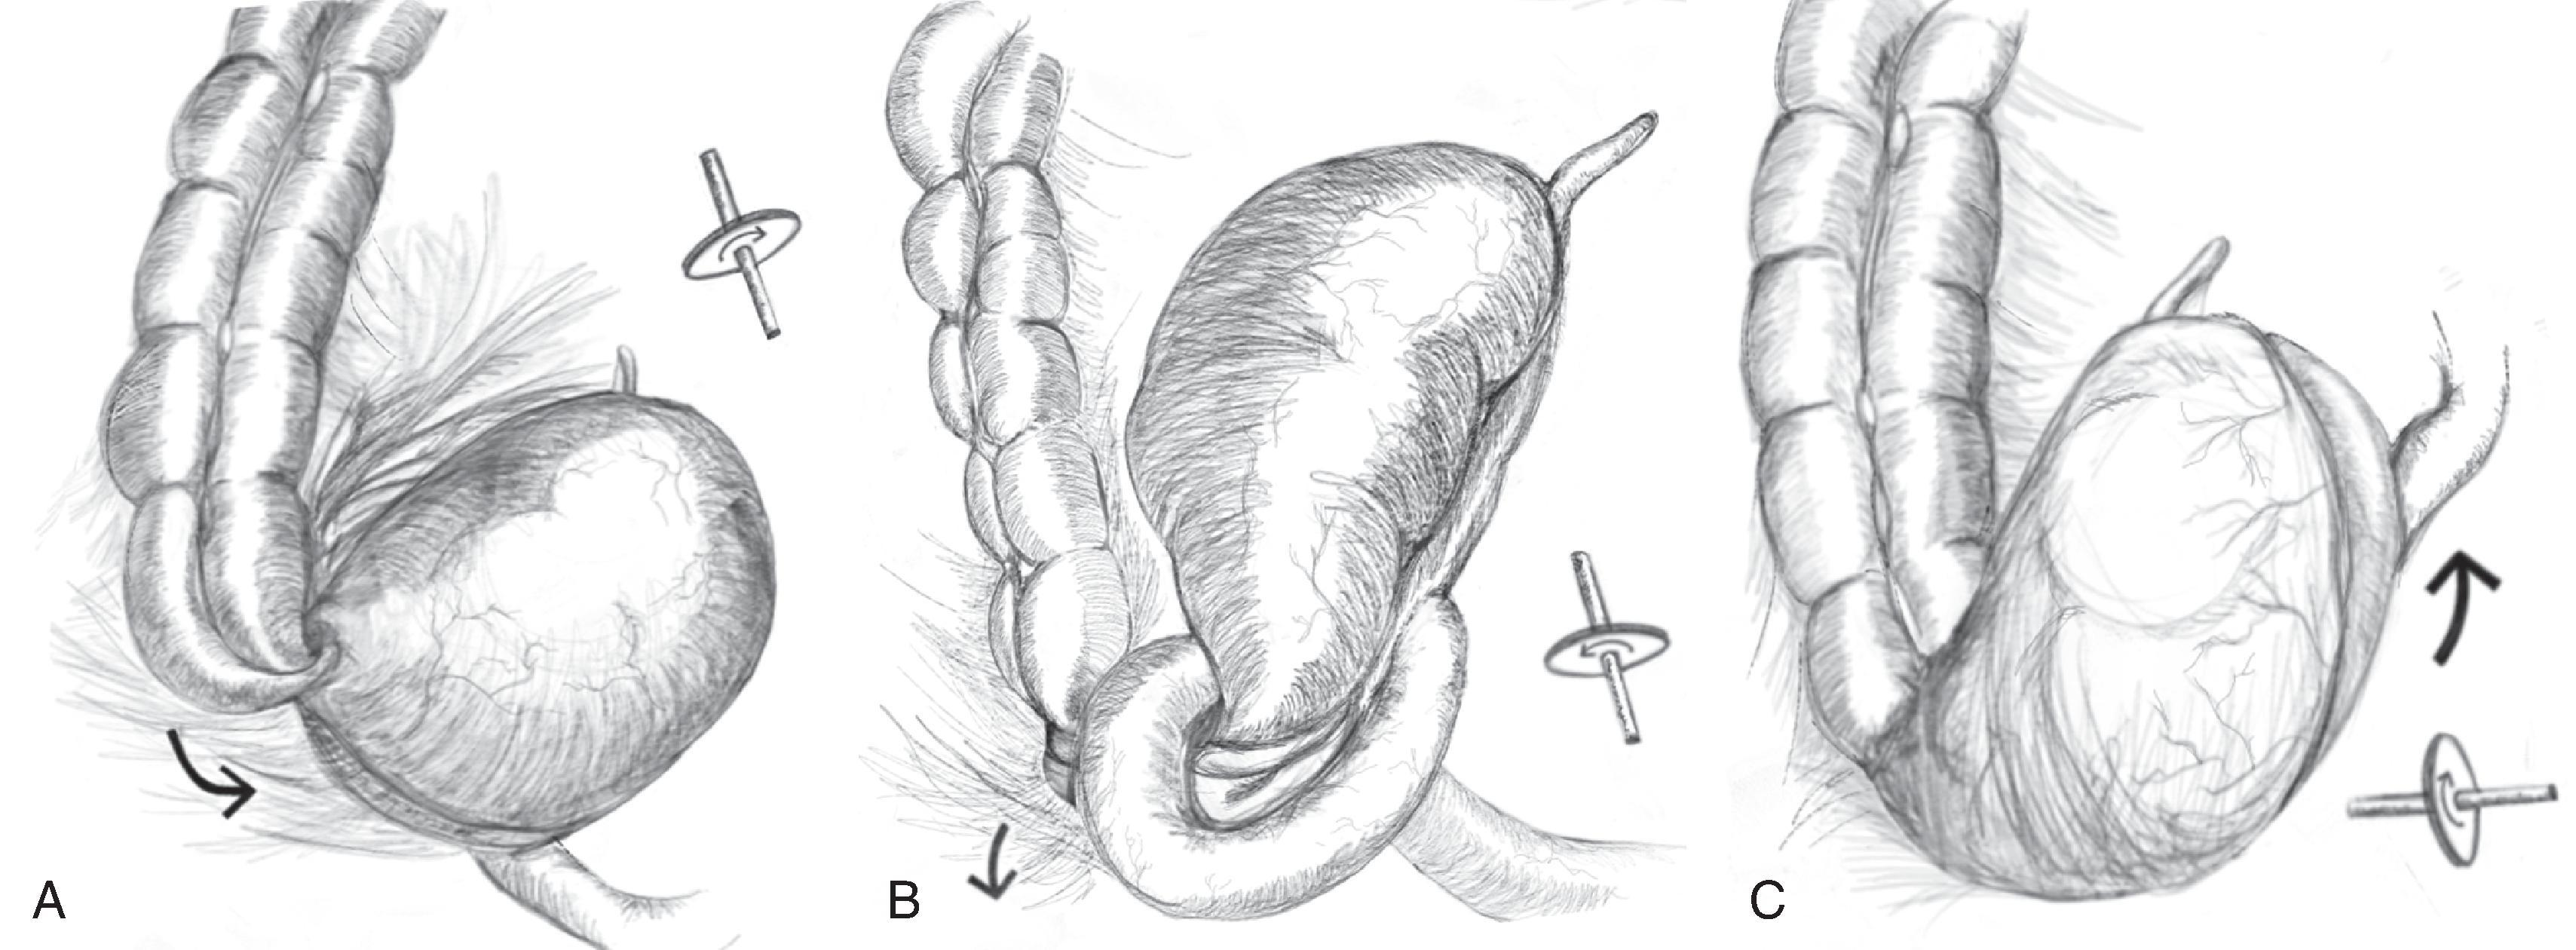 FIG. 4, Types of cecal volvulus. (A) Type 1, axial cecal volvulus. (B) Type 2, loop cecal volvulus. (C) Type 3, cecal bascule.